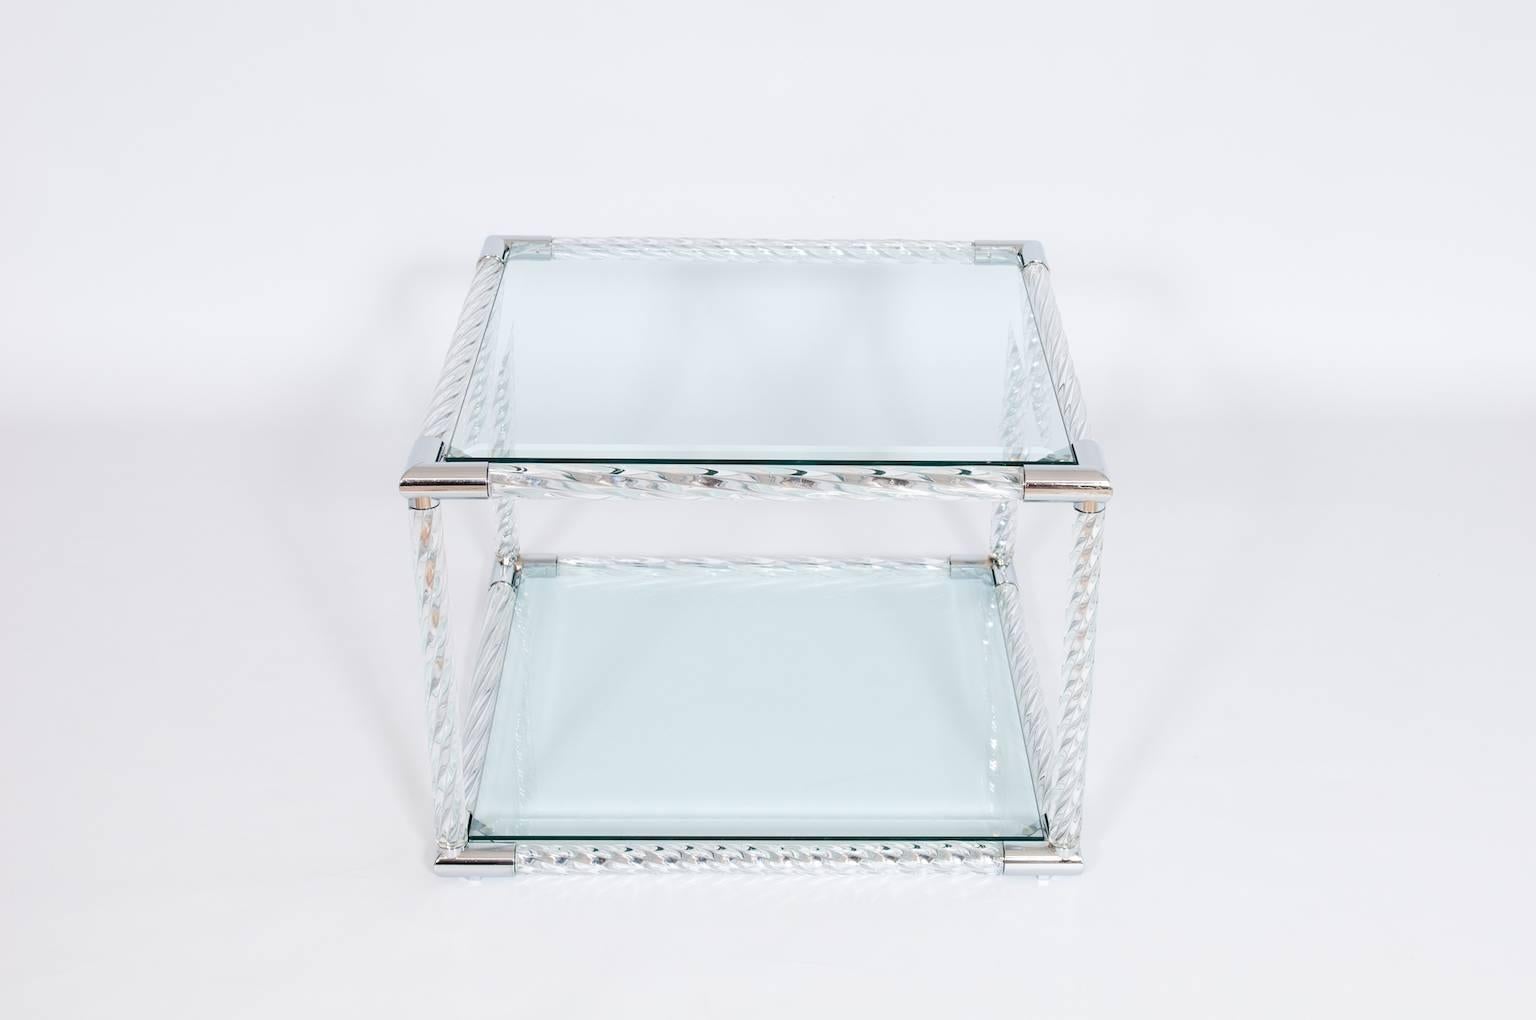 Exquisite Squared Coffe Table in Blown Murano Glass clear color and chromed finishes Italy, by Giovanni Dalla Fina.
This is an exclusive coffe table entirely hand crafted in blown Murano glass, designed and manufactured by the italian artist